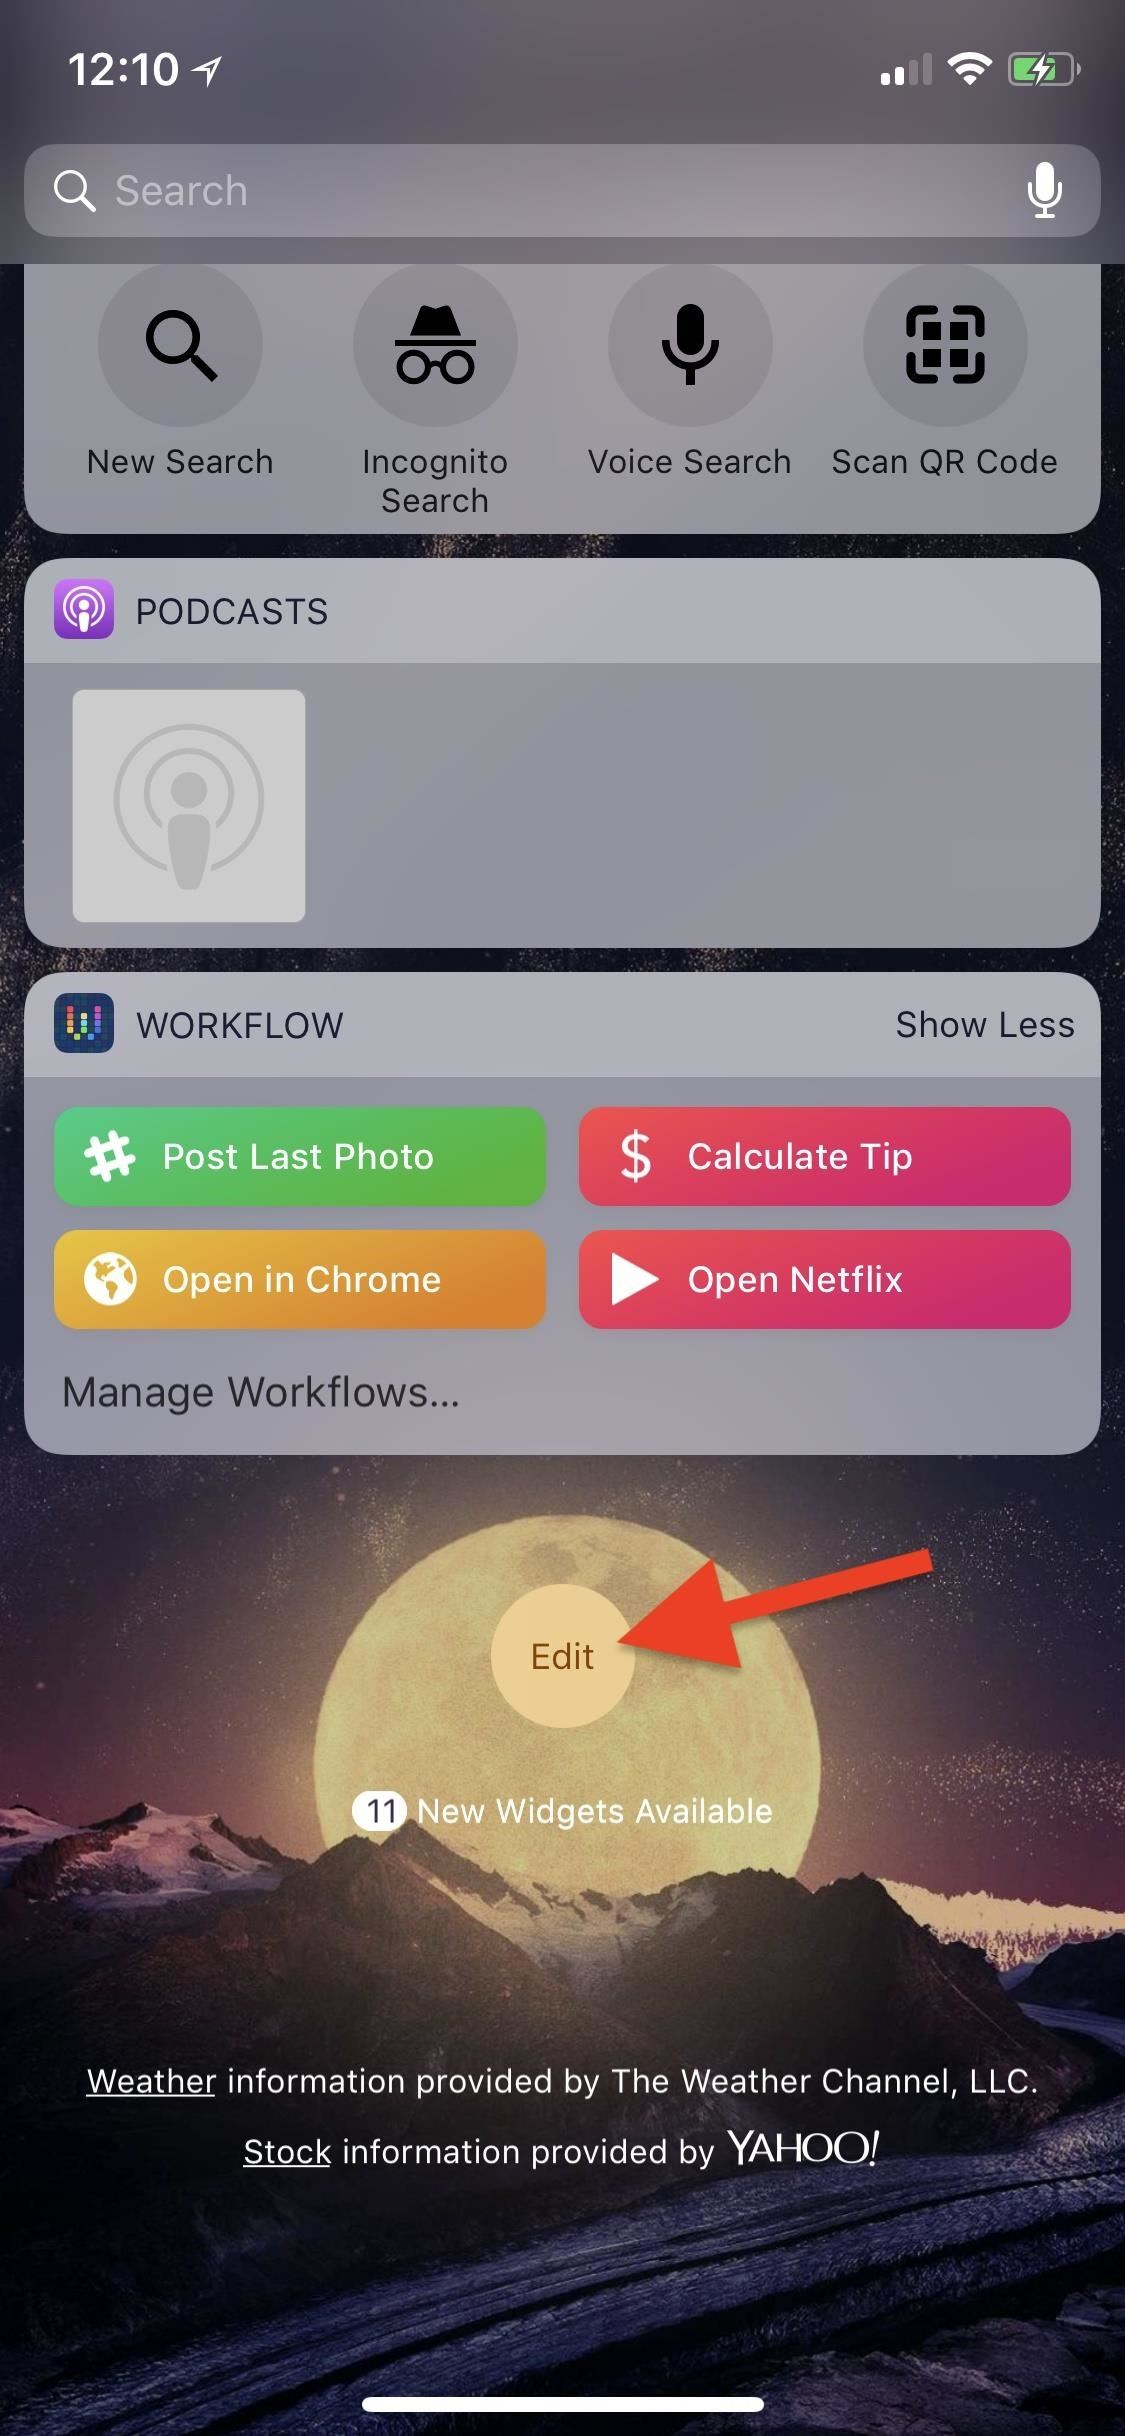 iOS Basics: How to Add Widgets to Your iPhone's Lock Screen & Notification Center